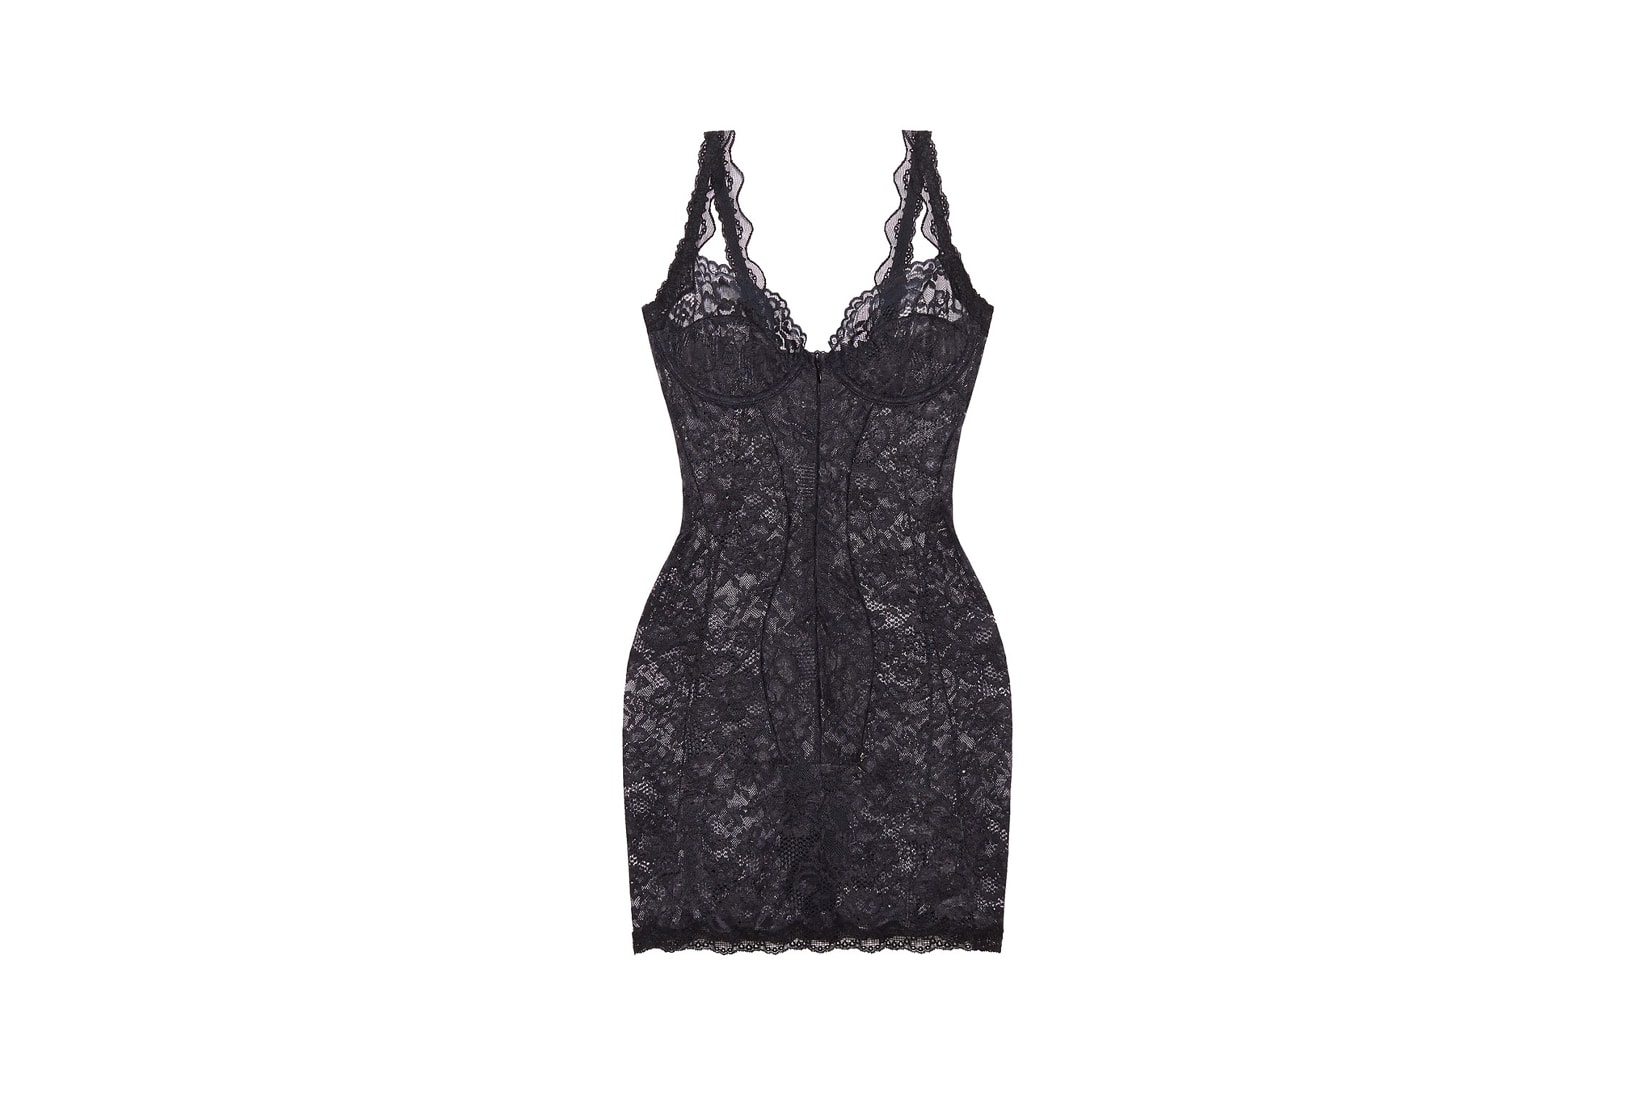 Savage X Fenty Fall Winter 2019 Lingerie Collection Lace Dress Black Amazon